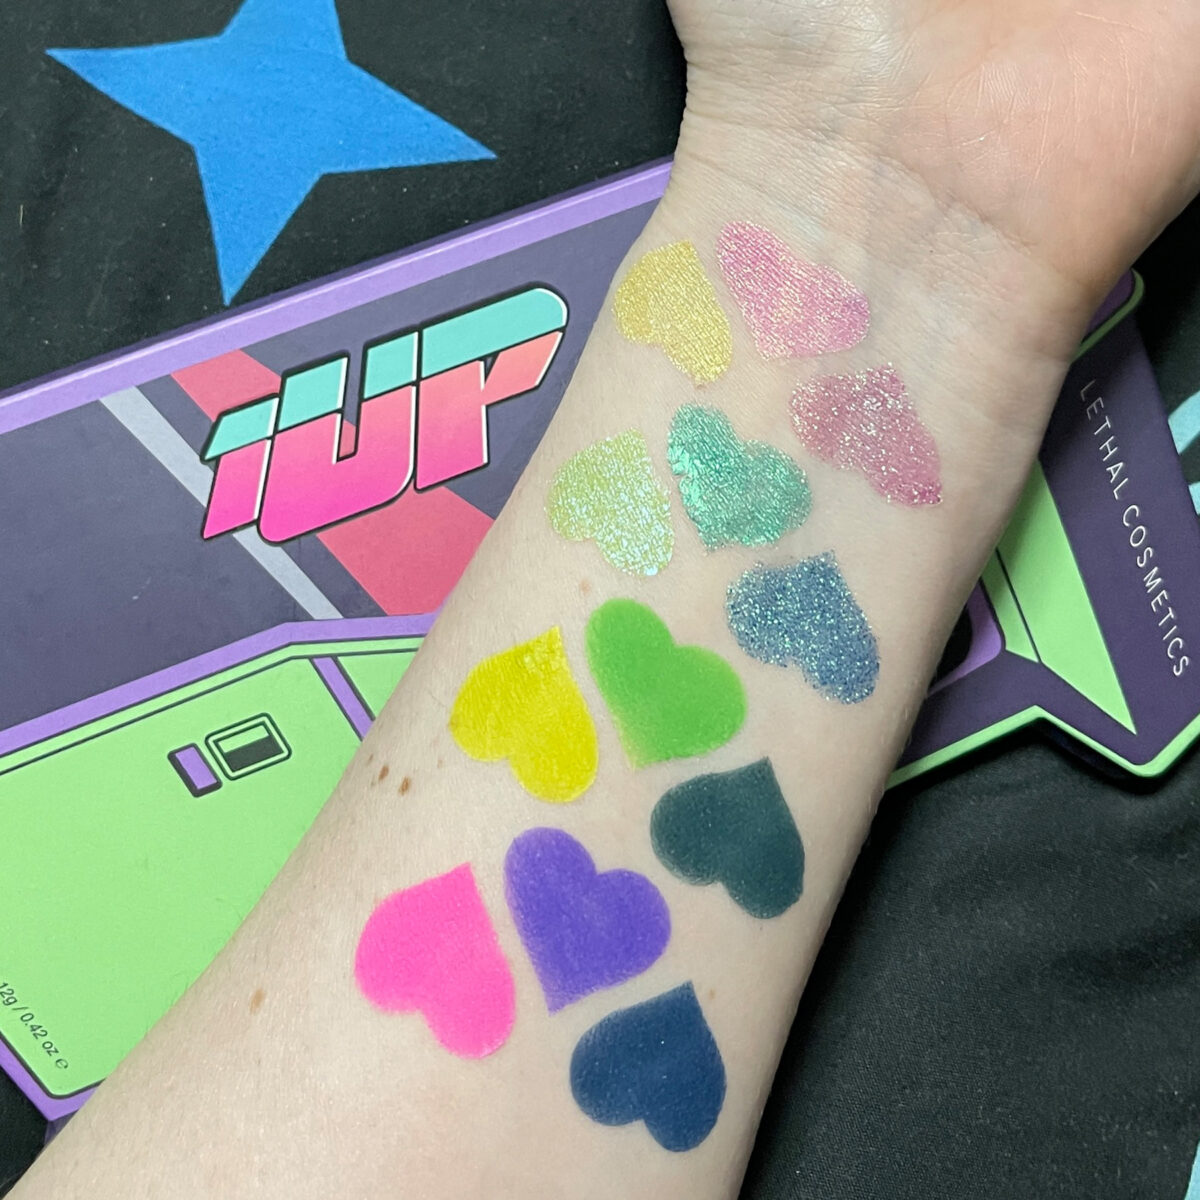 Lethal 1UP swatches on pale skin